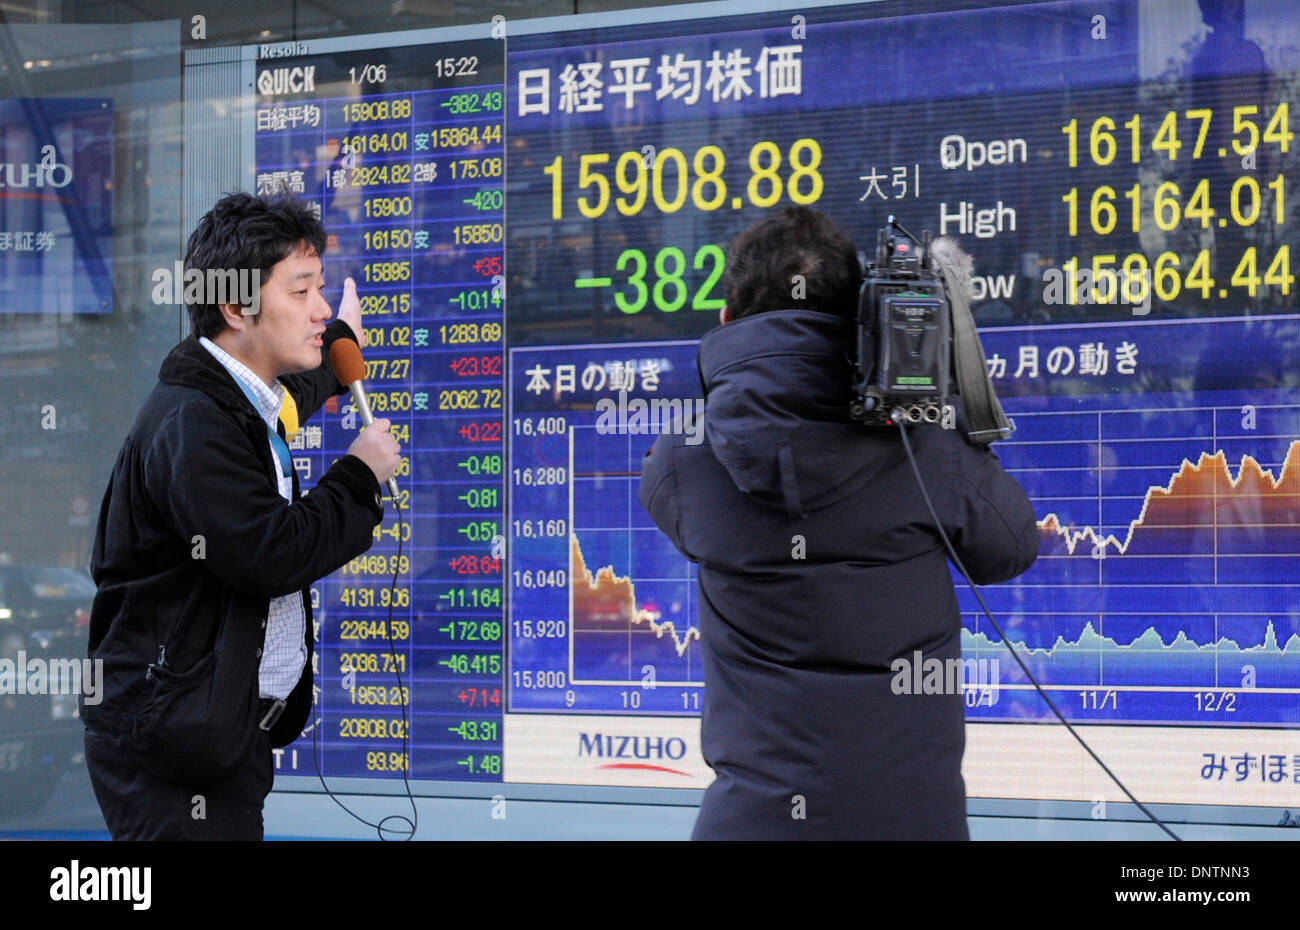 Tokyo, Japan. 6th Jan, 2014. A TV reporter talks to a camera in front of an electronic board showing the stock index in Tokyo, Japan, Jan. 6, 2014. The 225-issue Nikkei Stock Average closed down 382.43 points from the end of 2013 at 15,908.88. Credit:  Stringer/Xinhua/Alamy Live News Stock Photo